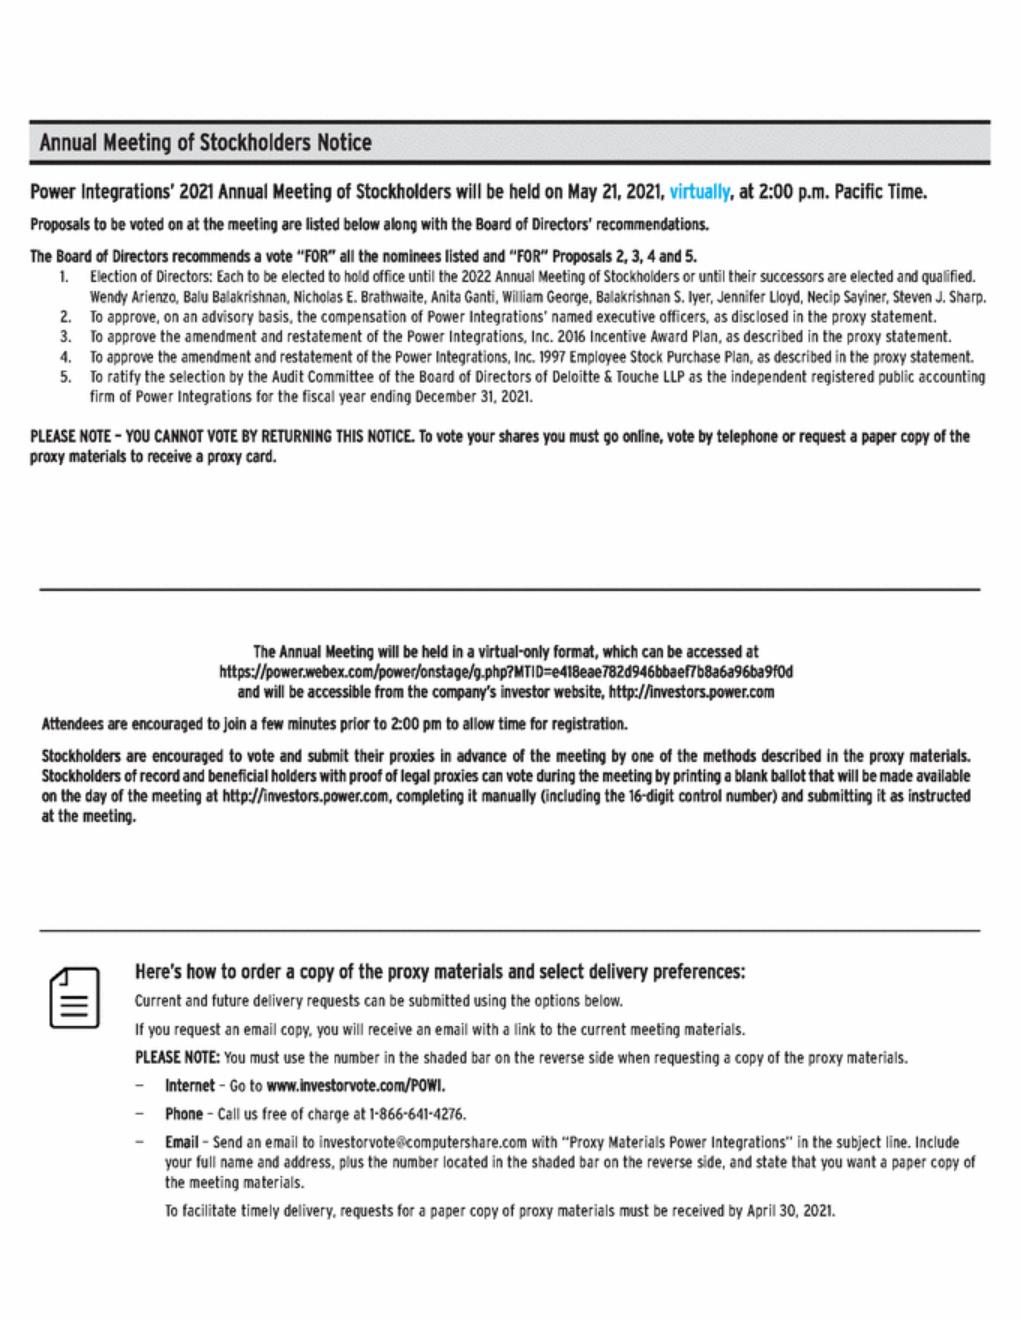 New Microsoft Word Document_03f3rb_power_integrations_notice_03-22-21_page_2.gif